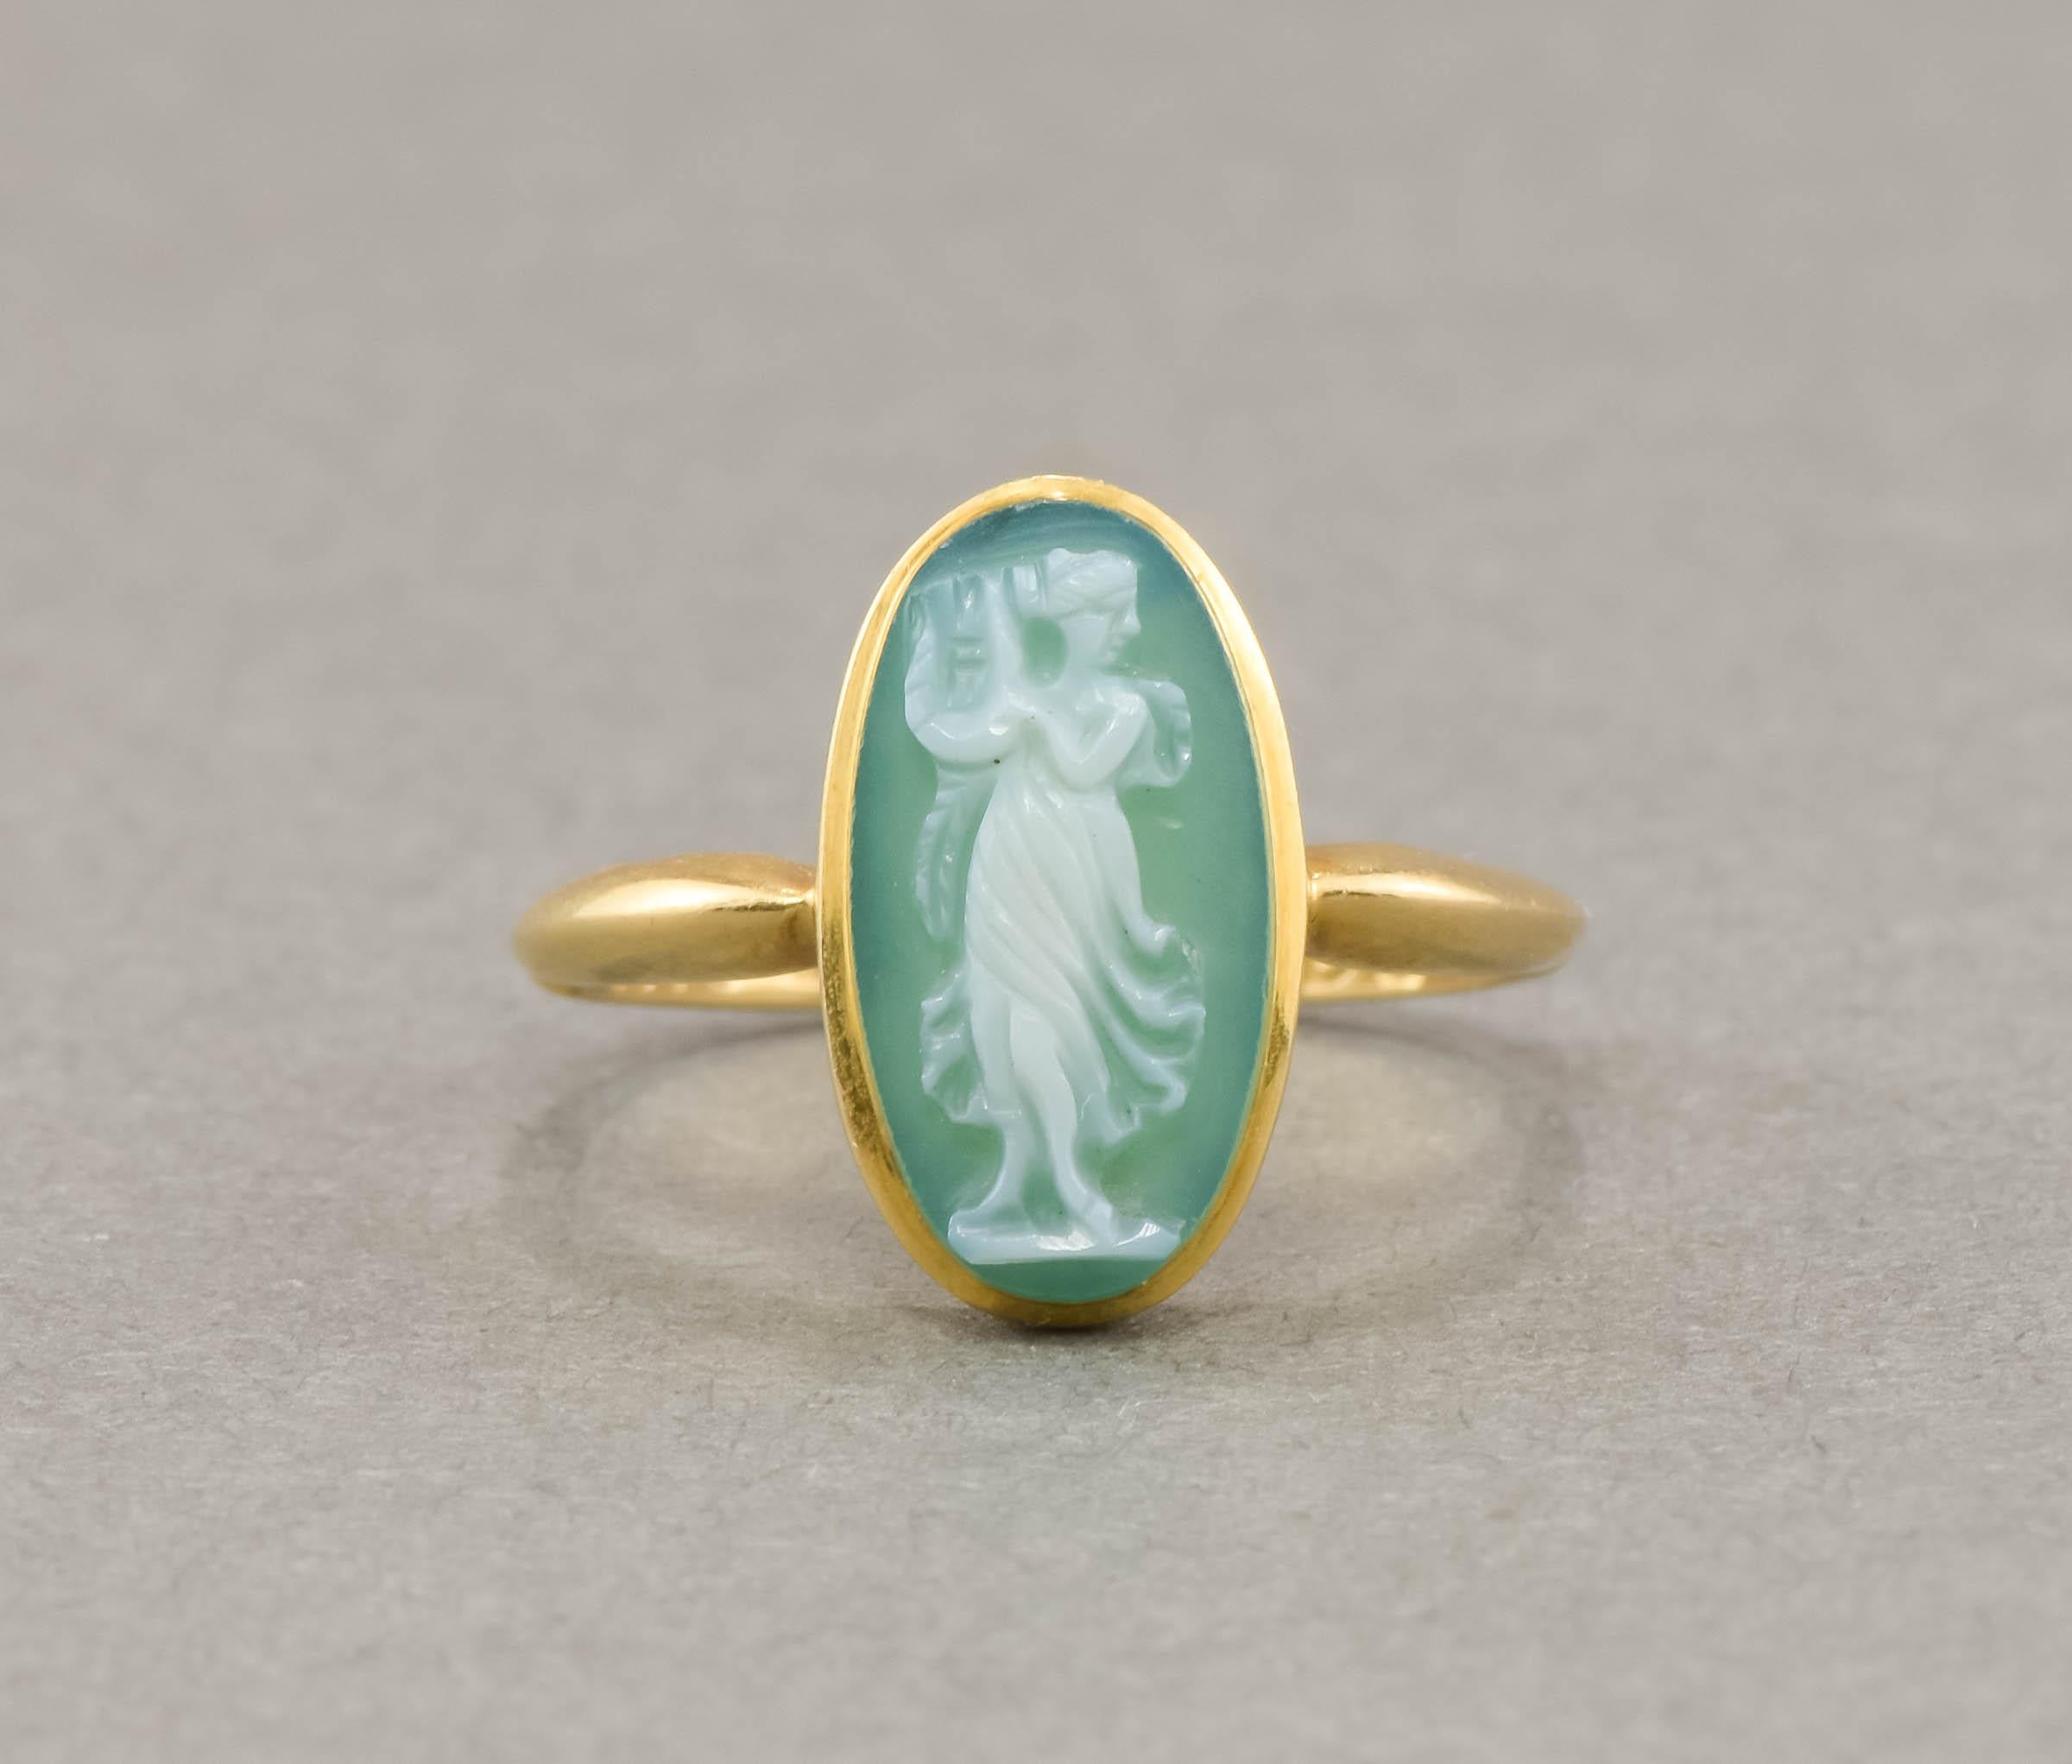 Being very partial to green gems, I was so pleased to find this antique hand carved green chalcedony cameo ring at a recent auction.  In fantastic condition, it retains its original English hallmarks dating it to 1909.

Crafted of solid 18K yellow